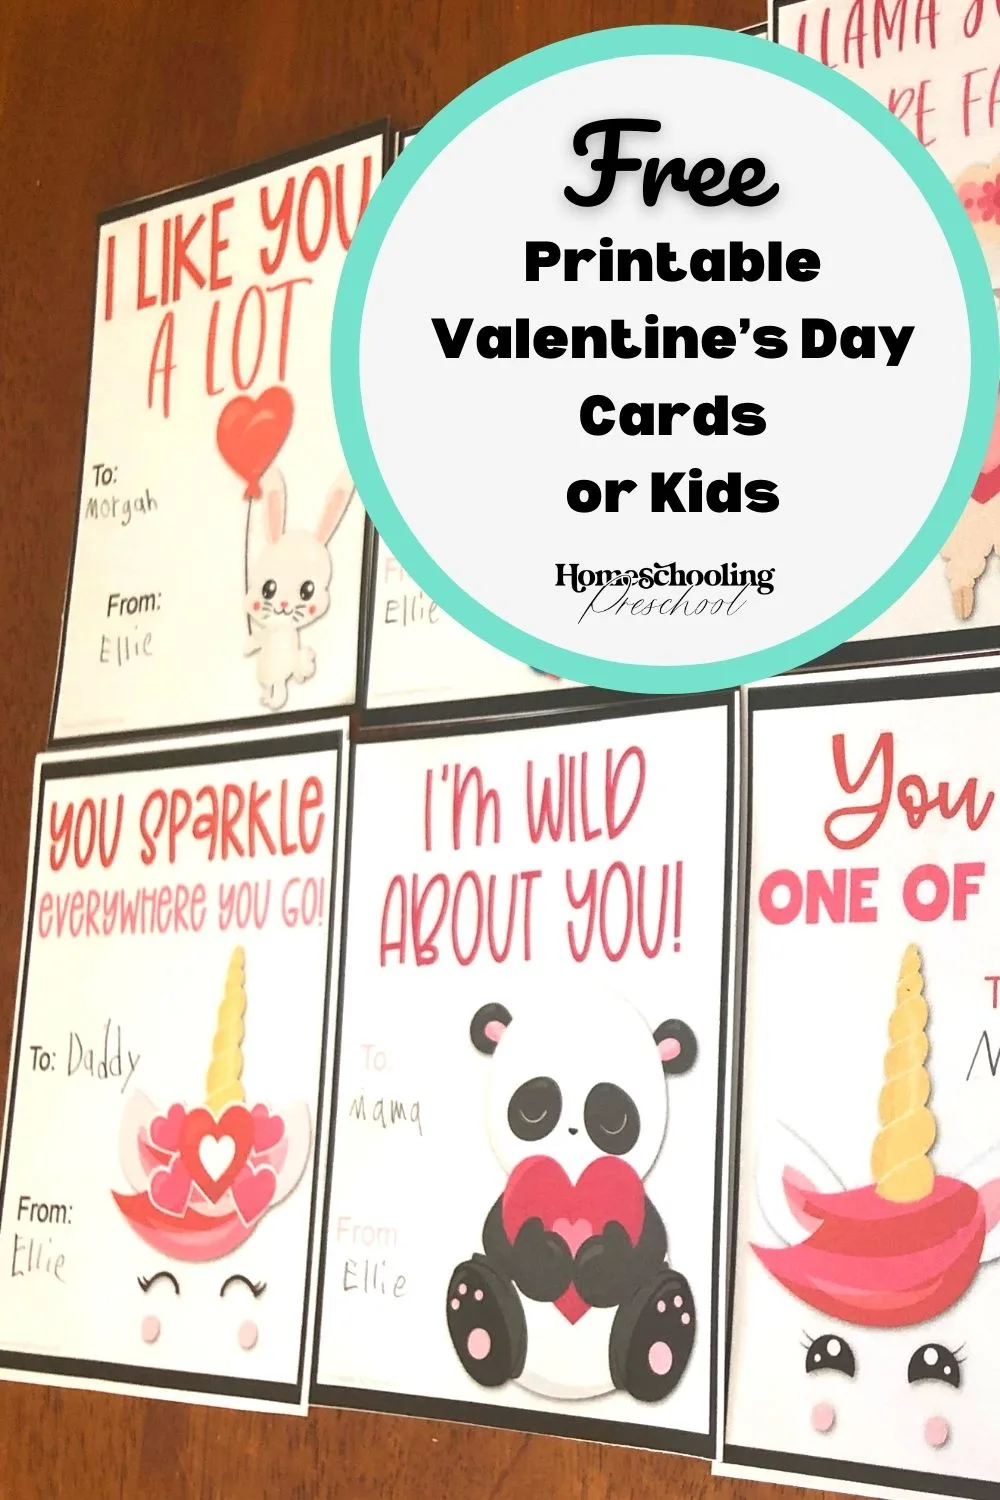 Free Printable Valentine's Day Cards for Kids